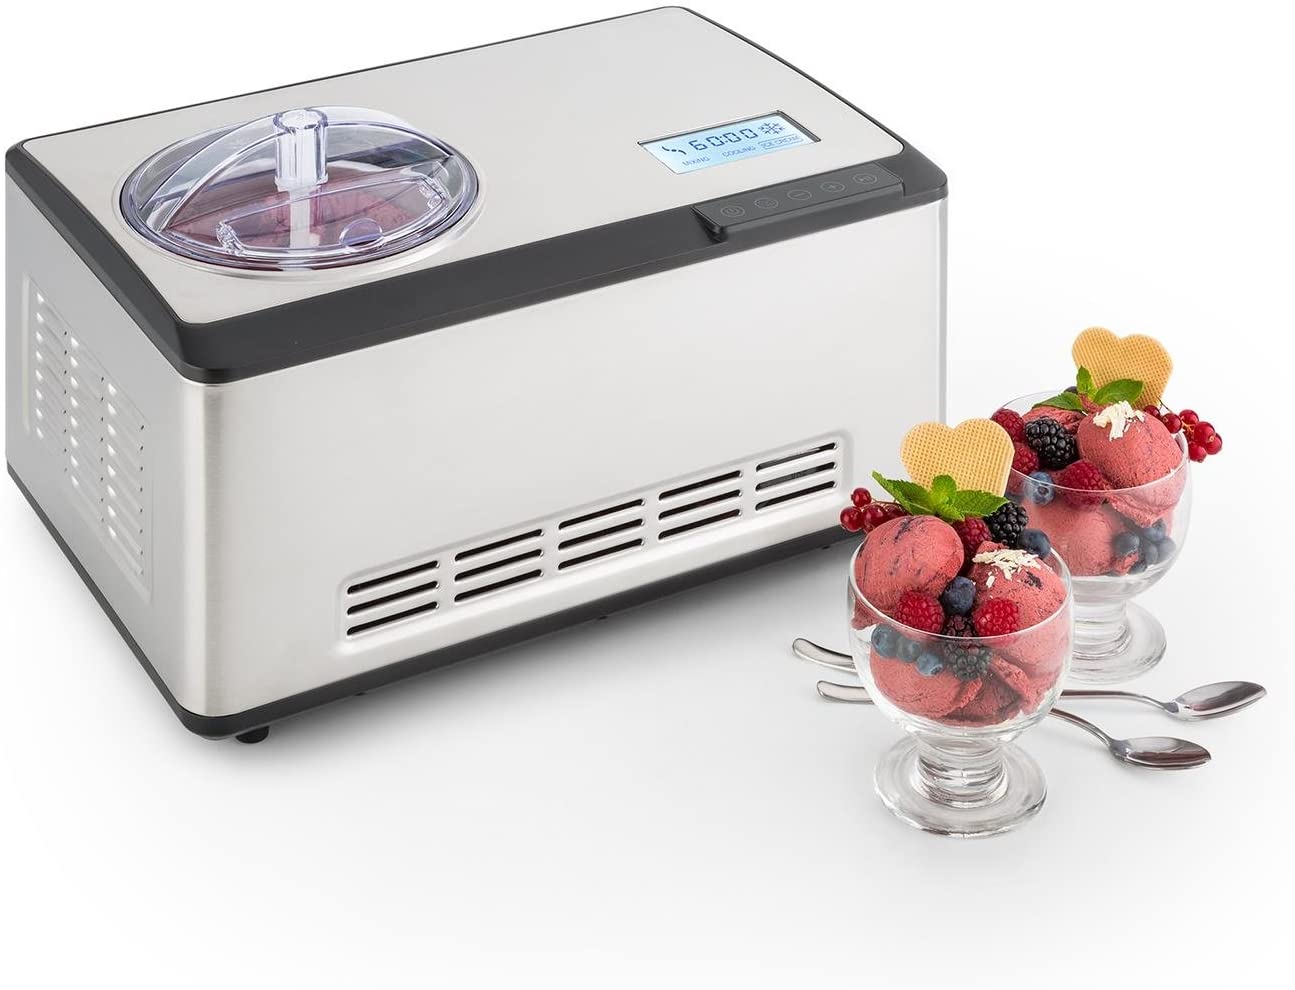 Klarstein Dolce Bacio Ice Cream Maker Compression Ice Machine Also for Sorbet, Frozen Yogurt (2 Litres, 180 Watt, Timer, LCD Display, Touch, Cooling Function, Stainless Steel) Silver